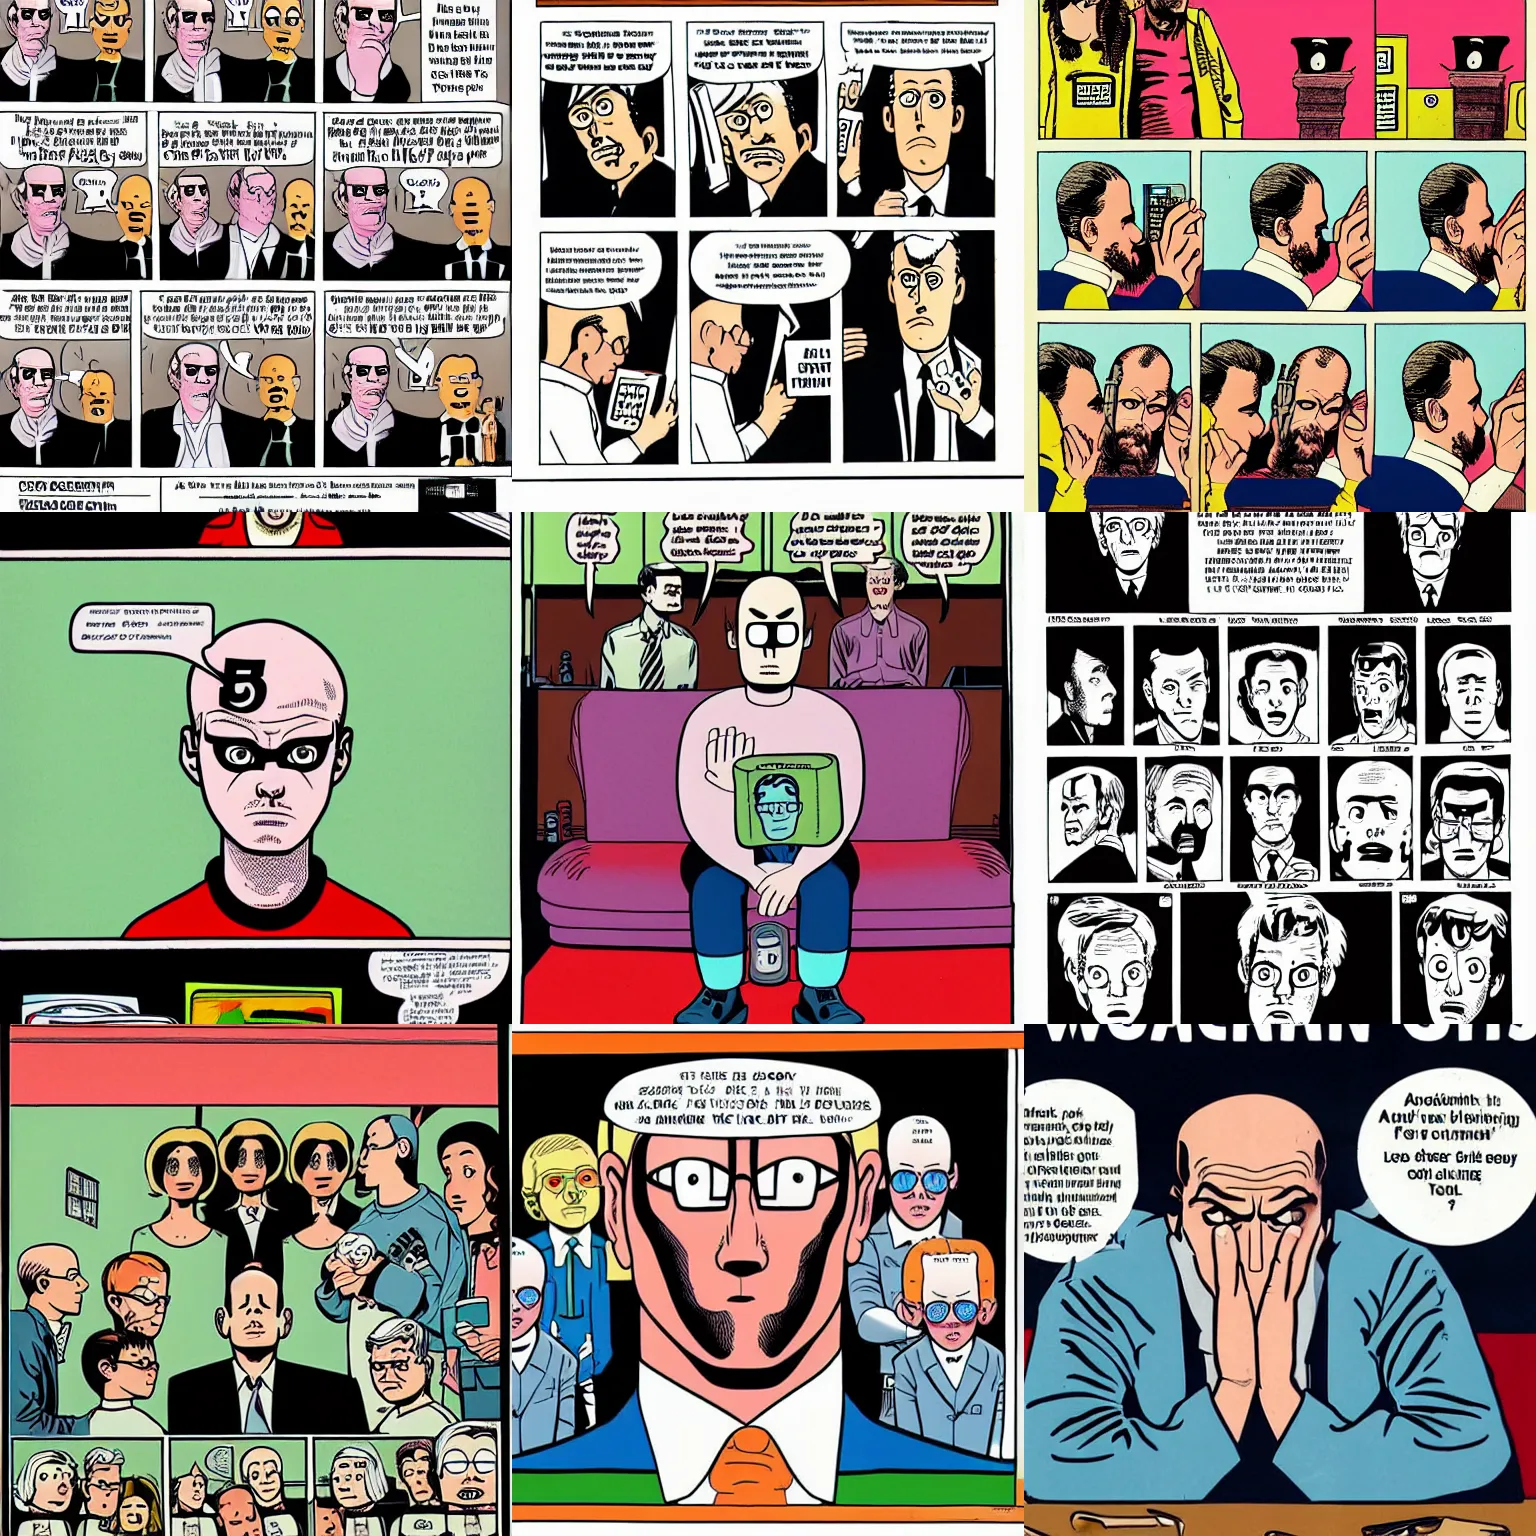 Prompt: a sad, worried guy by daniel clowes